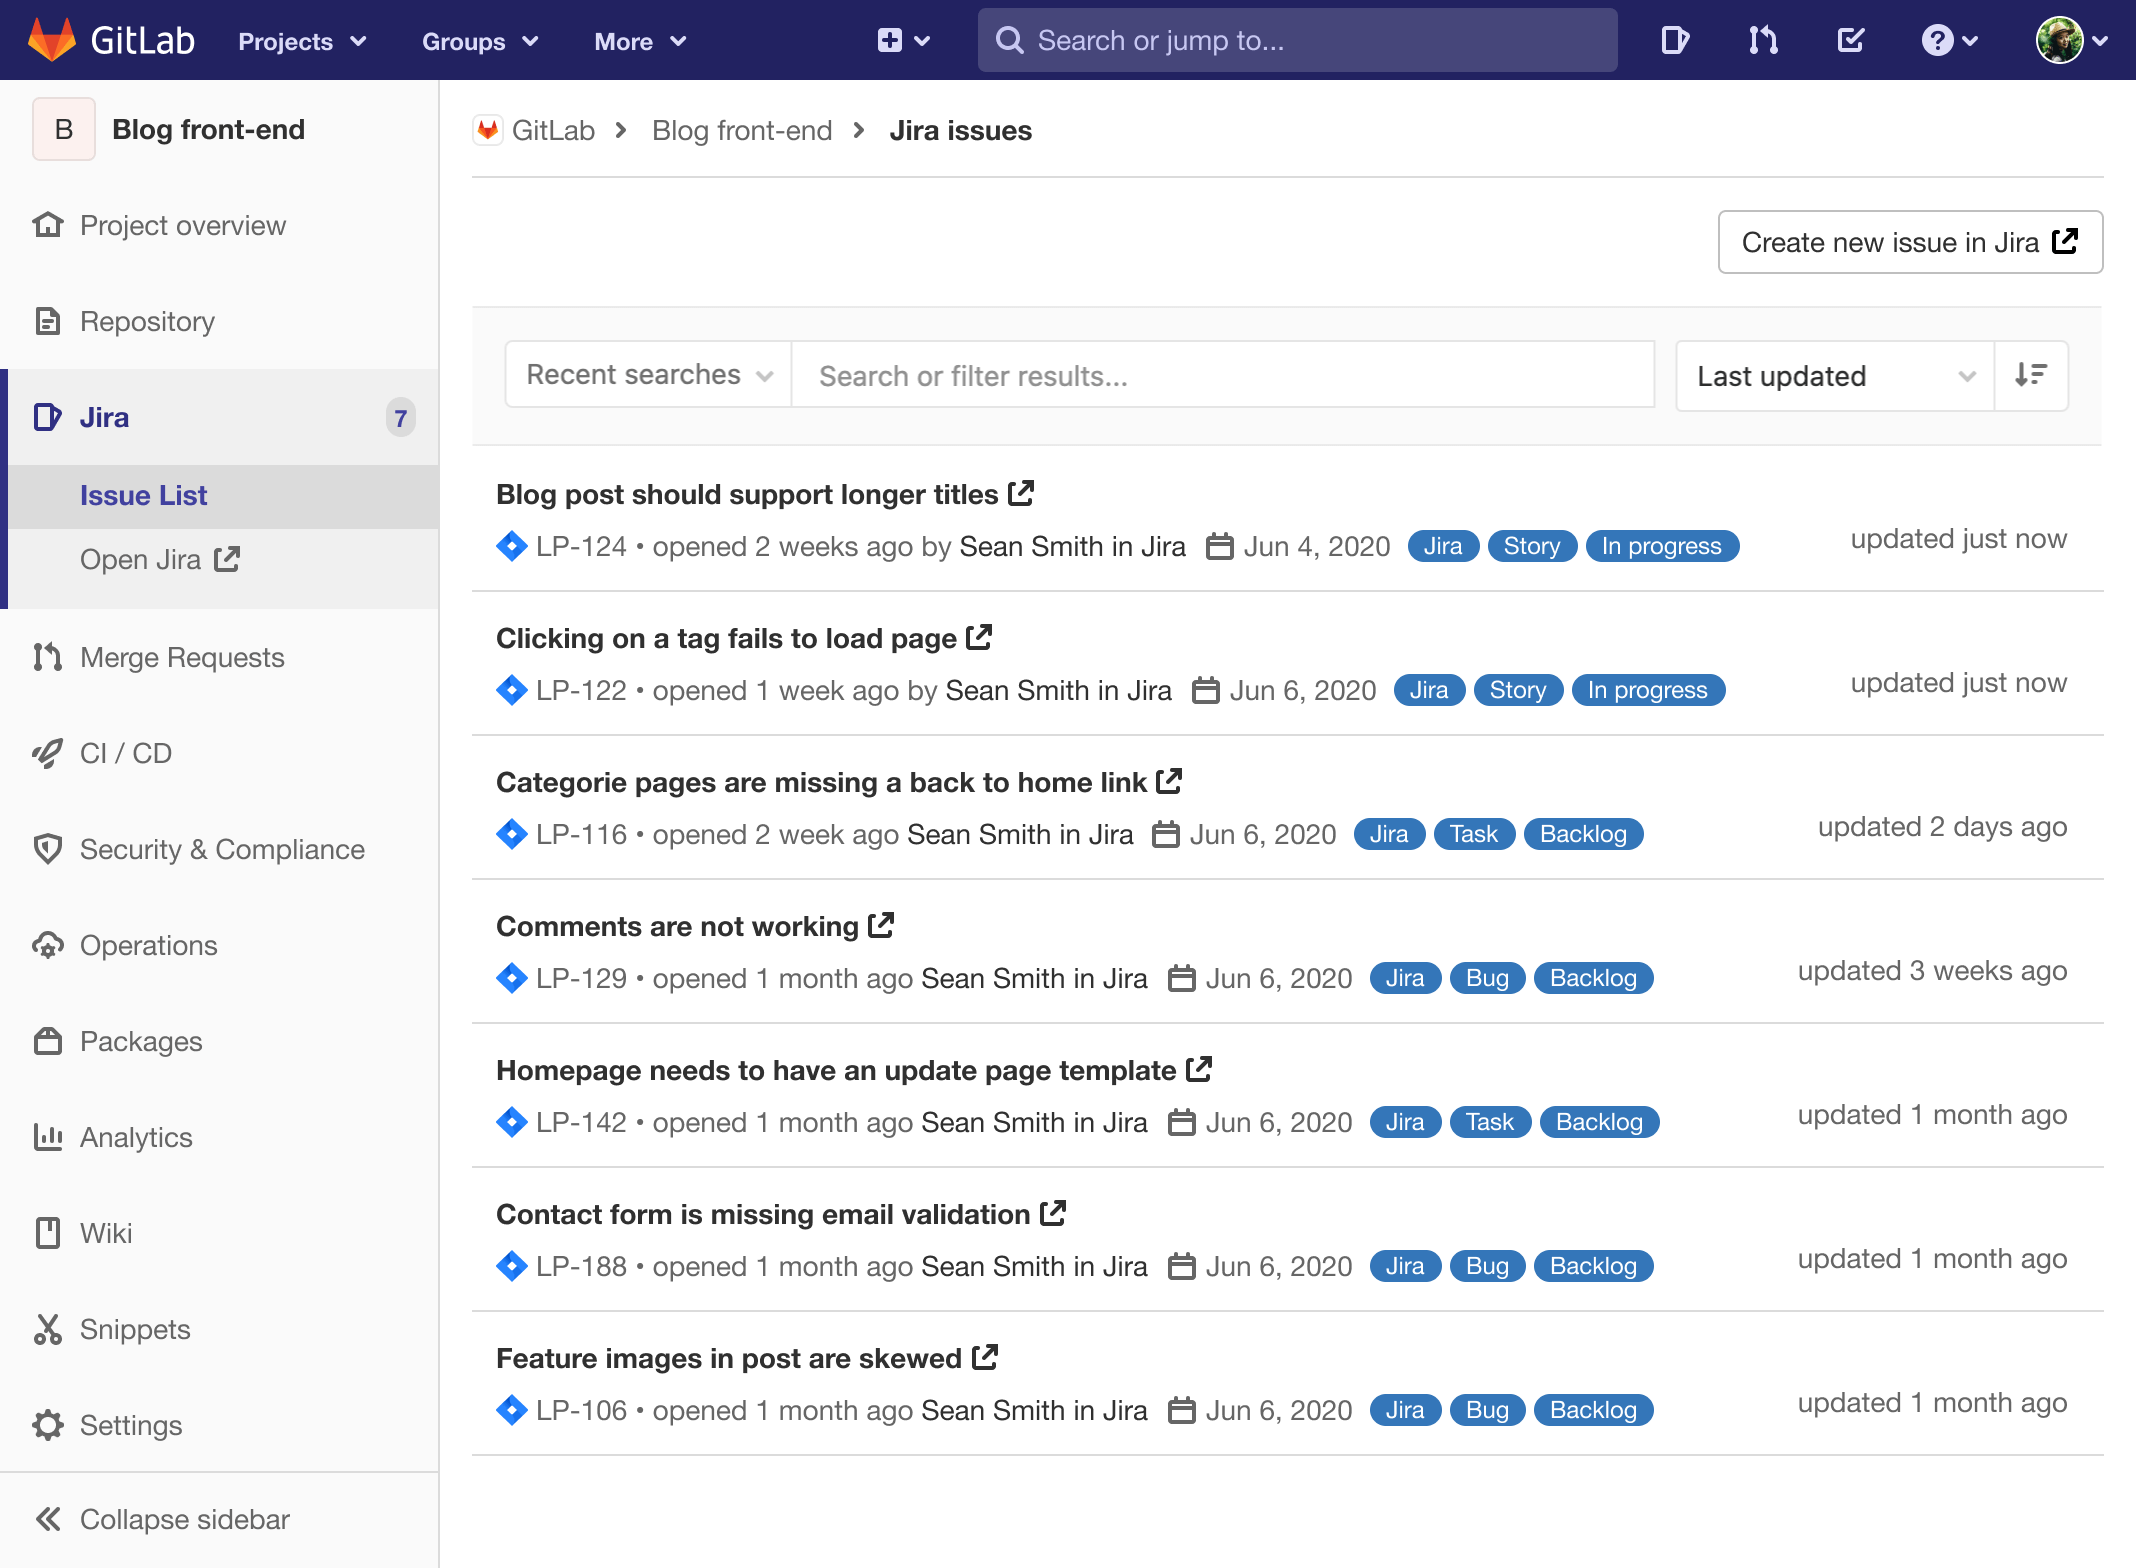 View Jira issue list in GitLab